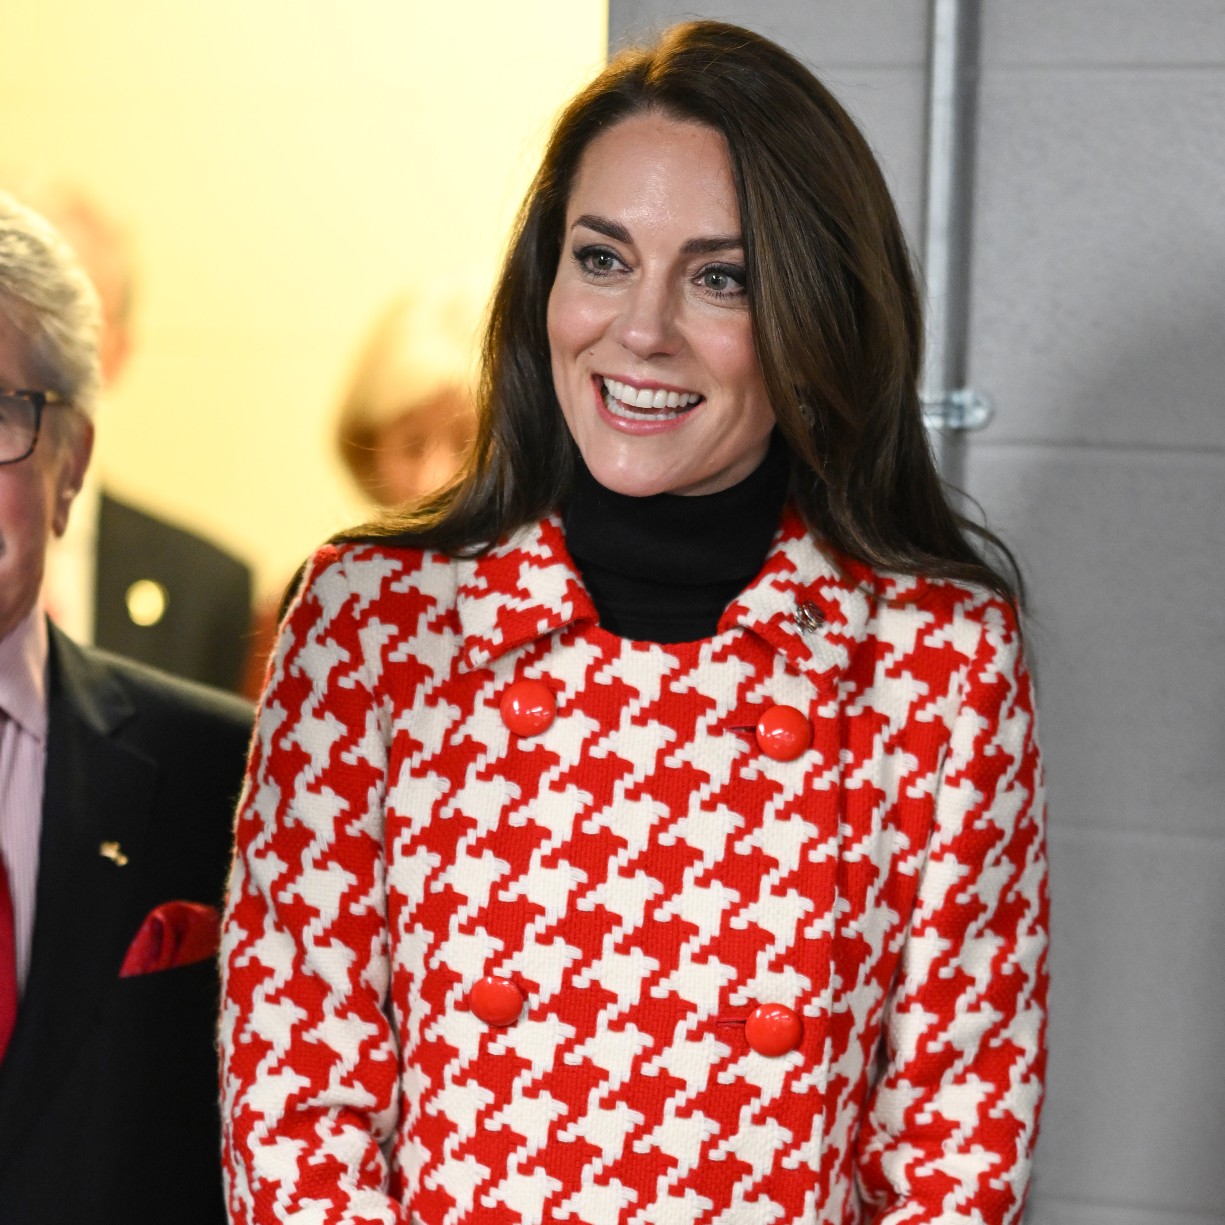 See Princess Kate Rewear Her Red Houndstooth Coat Dress to a Rugby